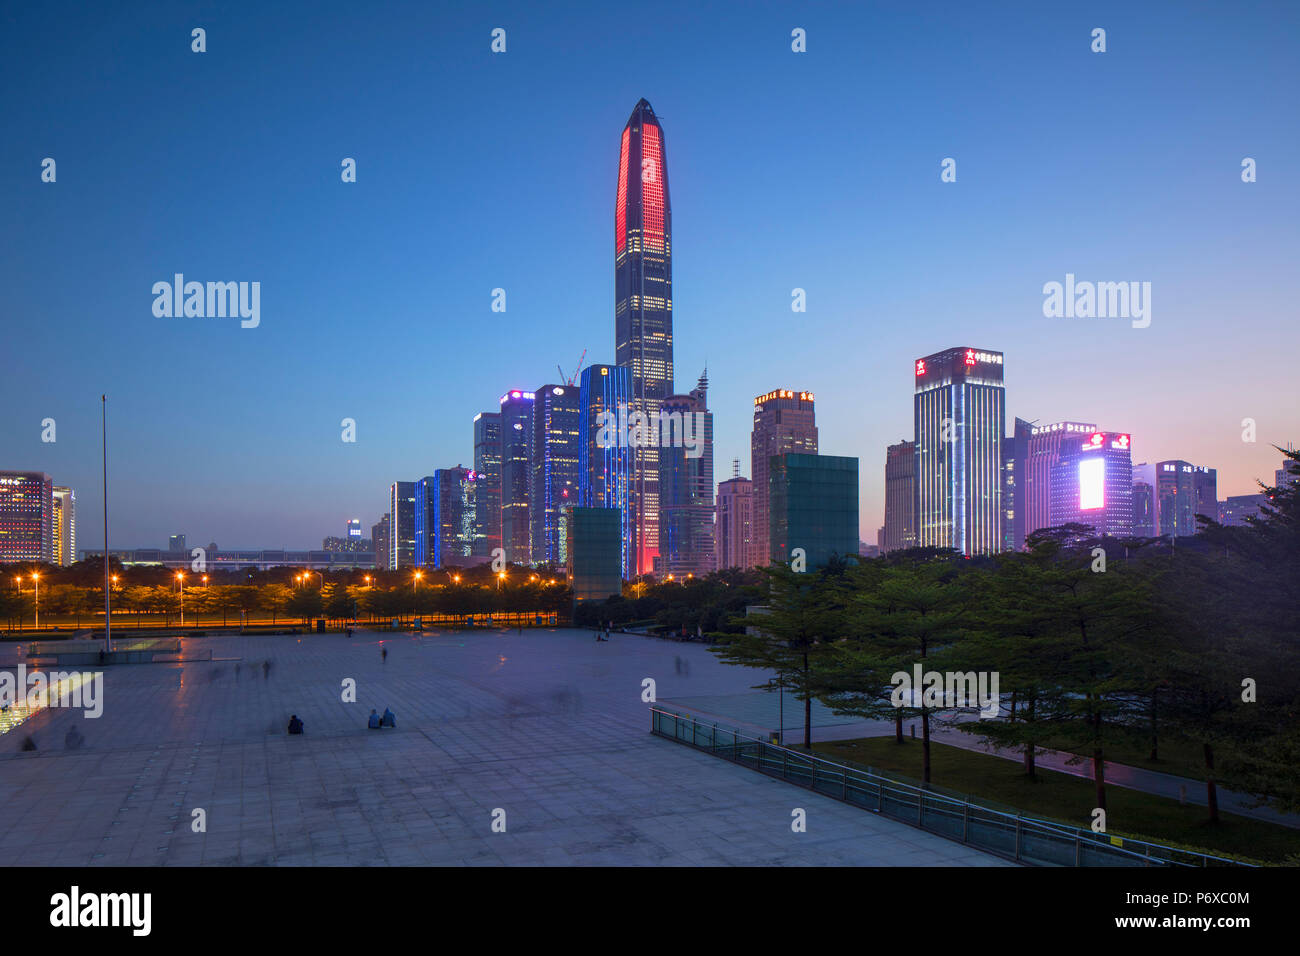 Ping An International Finance Centre (worldâ€™s 4th tallest building in 2017 at 600m) and Civic Square, Futian, Shenzhen, Guangdong, China Stock Photo